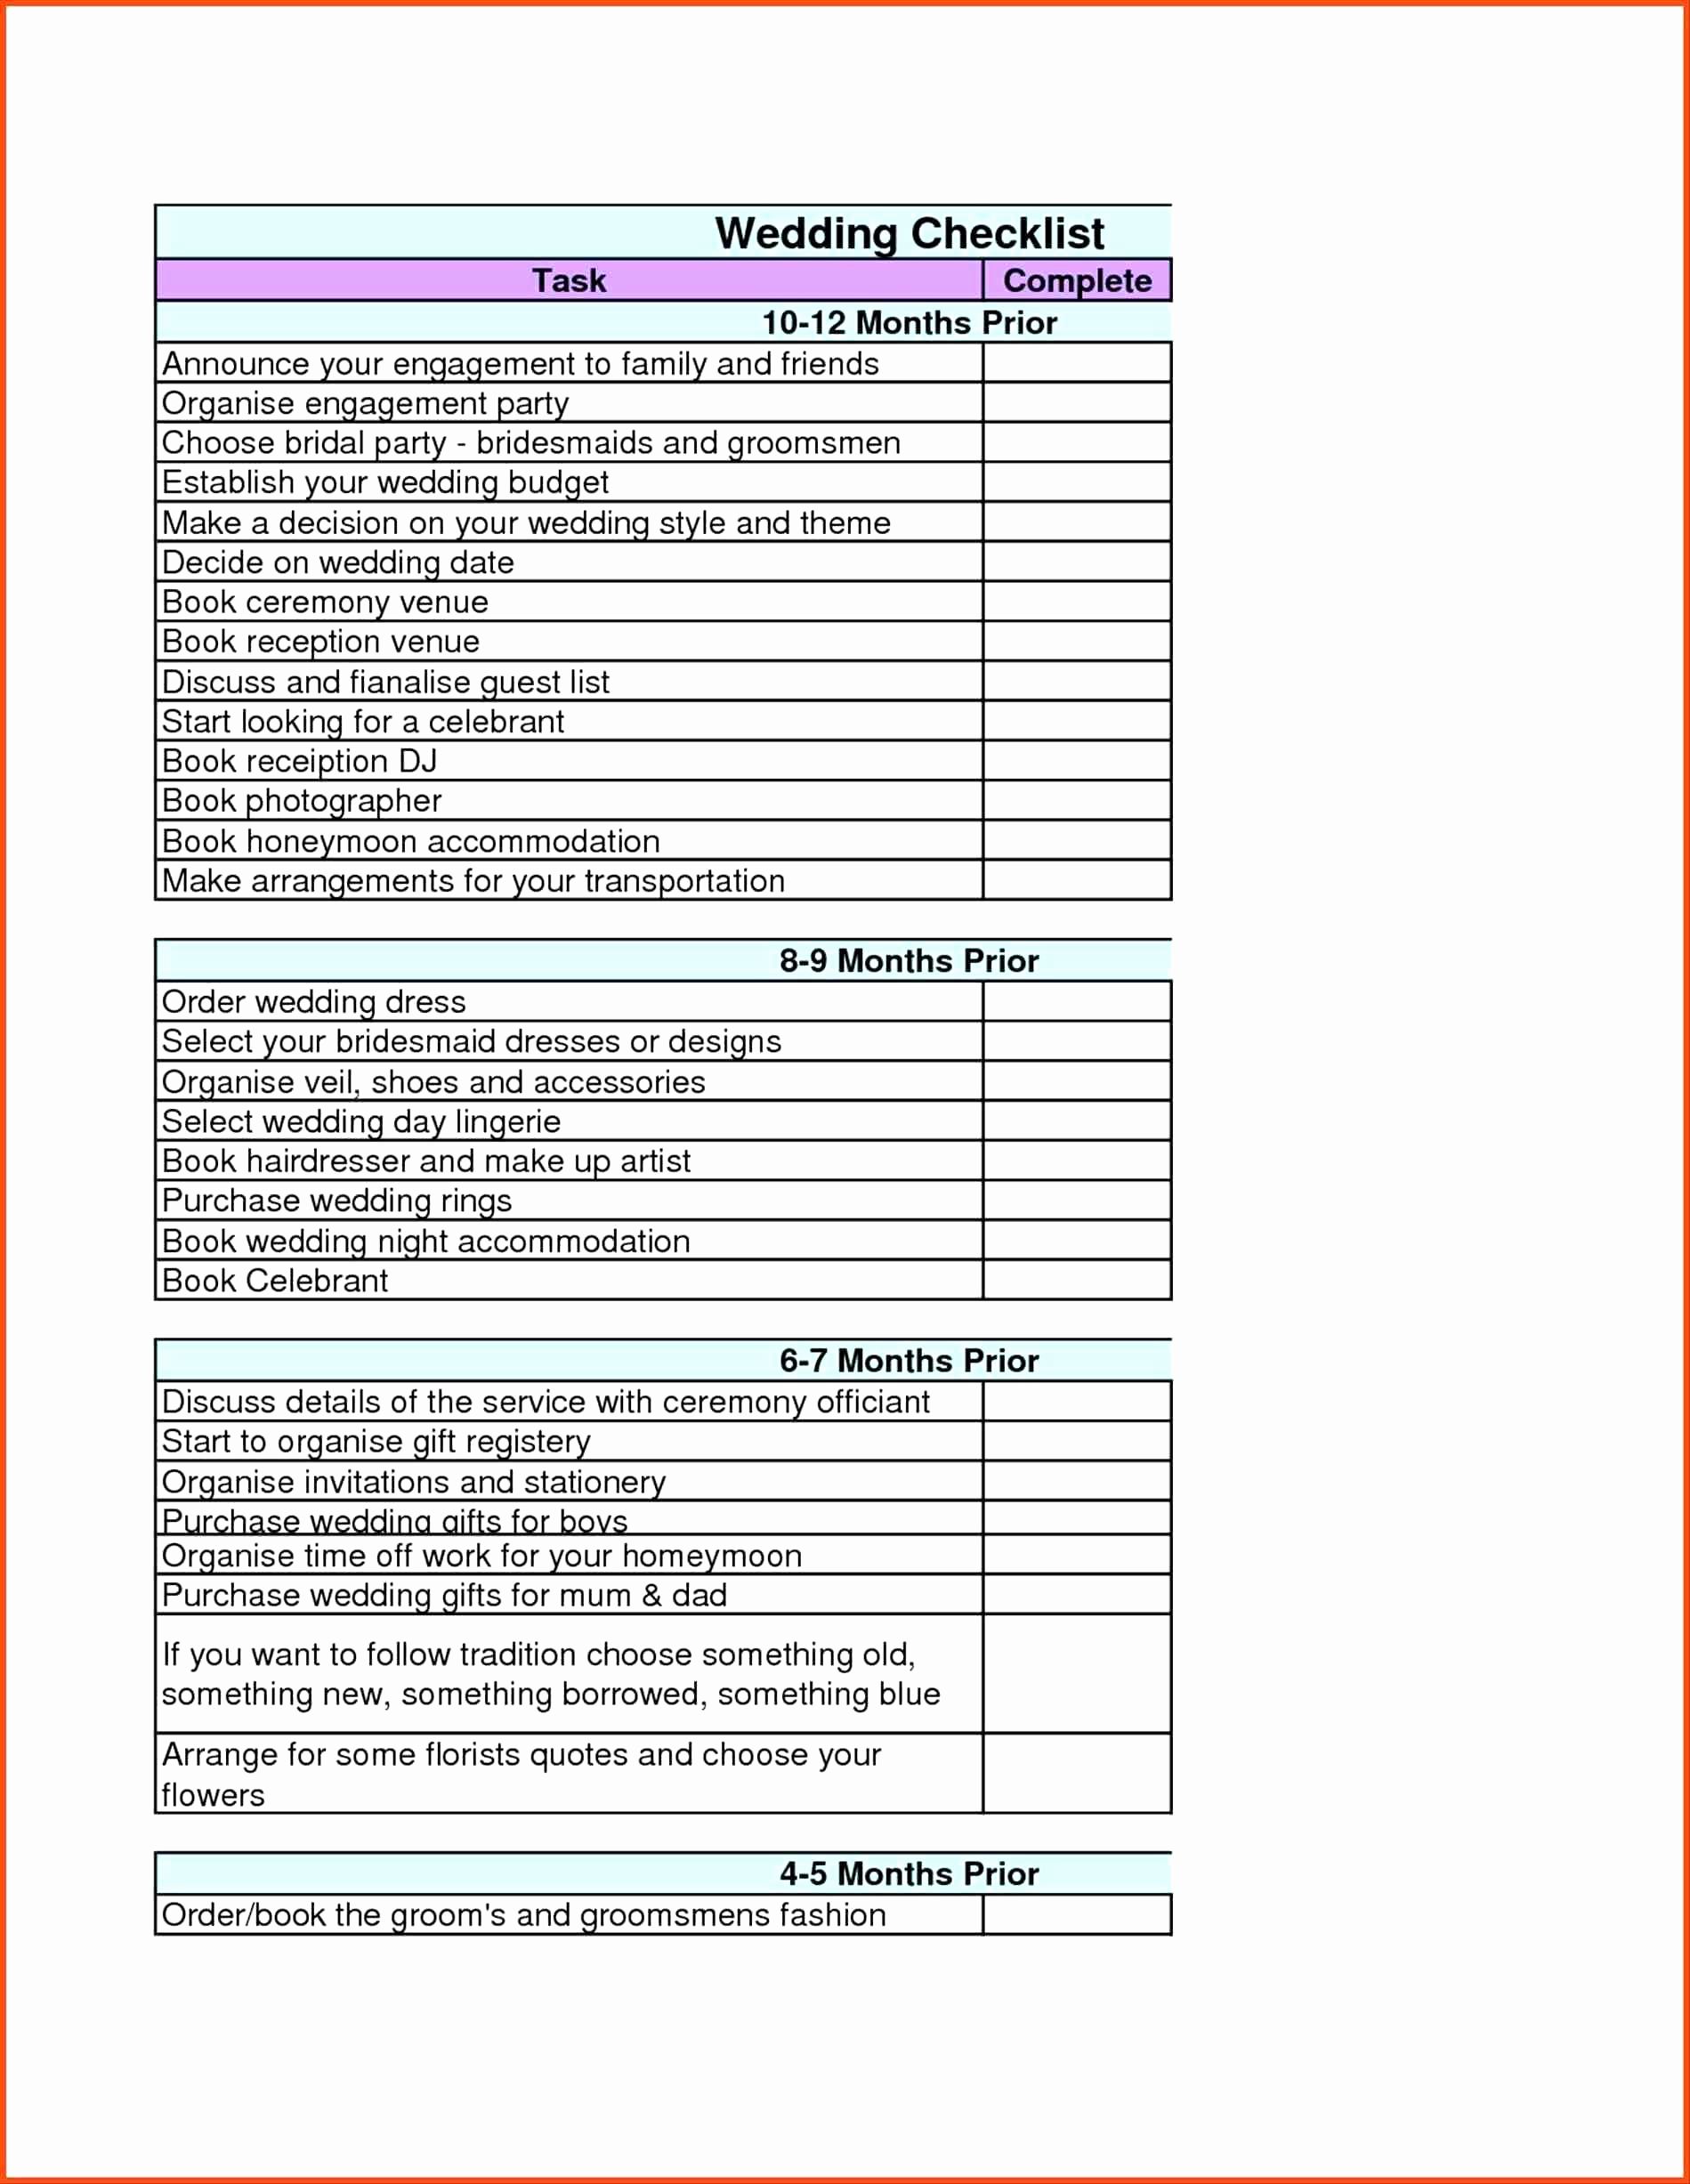 Blank Excel Spreadsheet Validation Protocol Template Within Excel Spreadsheet Validation Protocol Template Format